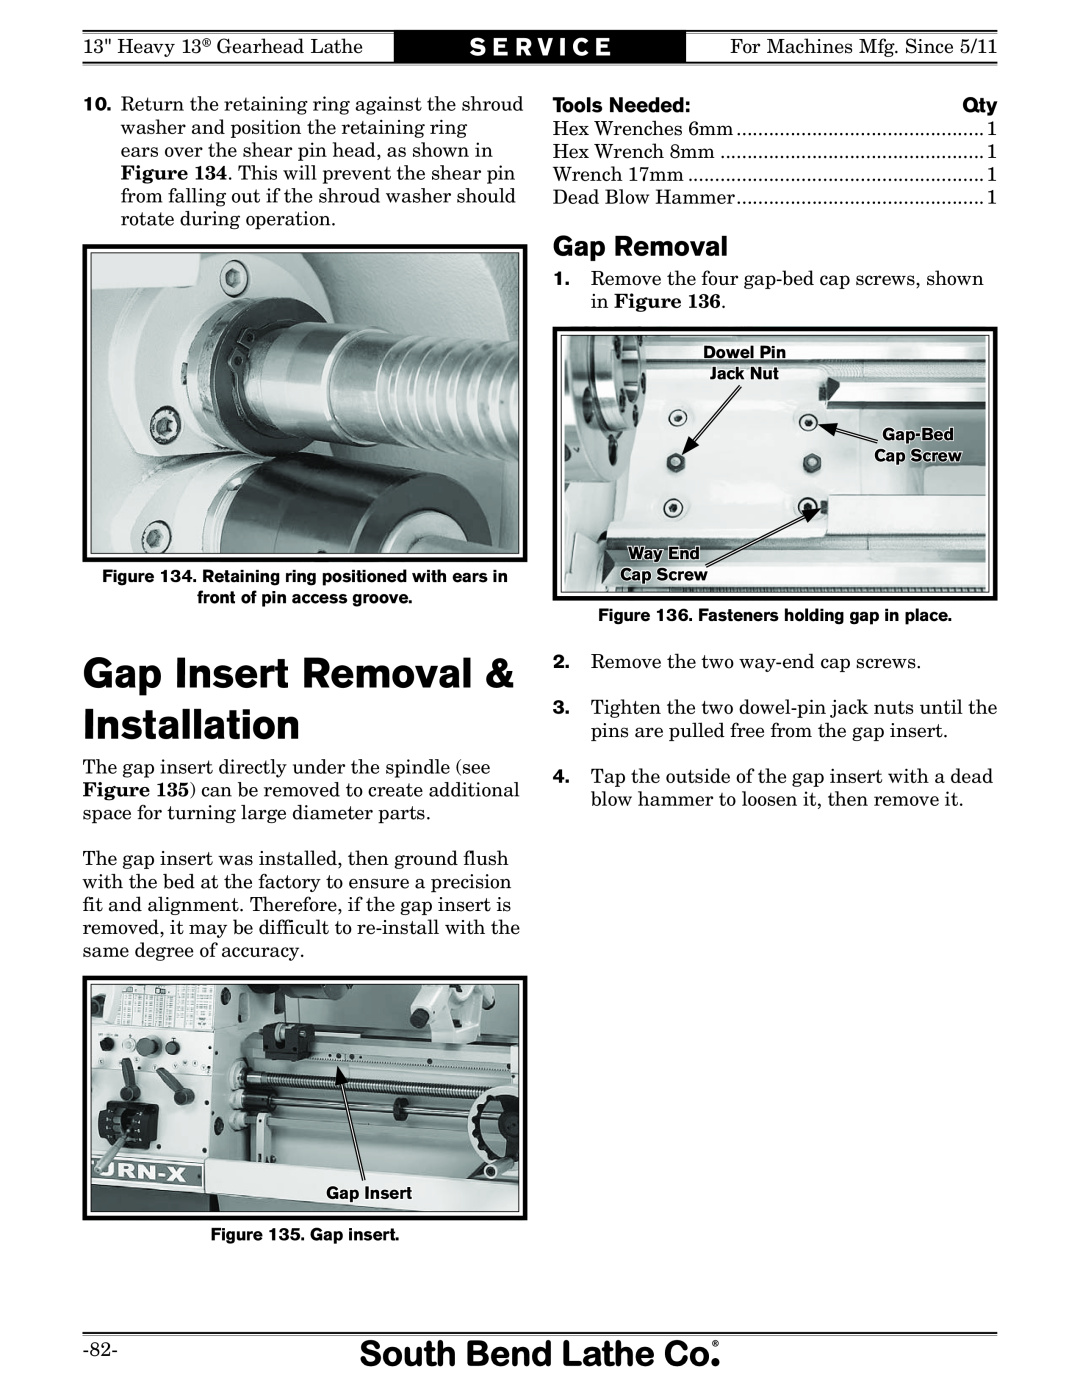 Southbend SB owner manual Gap Insert Removal & Installation, Gap Removal, S E R V I C E, Tools Needed 